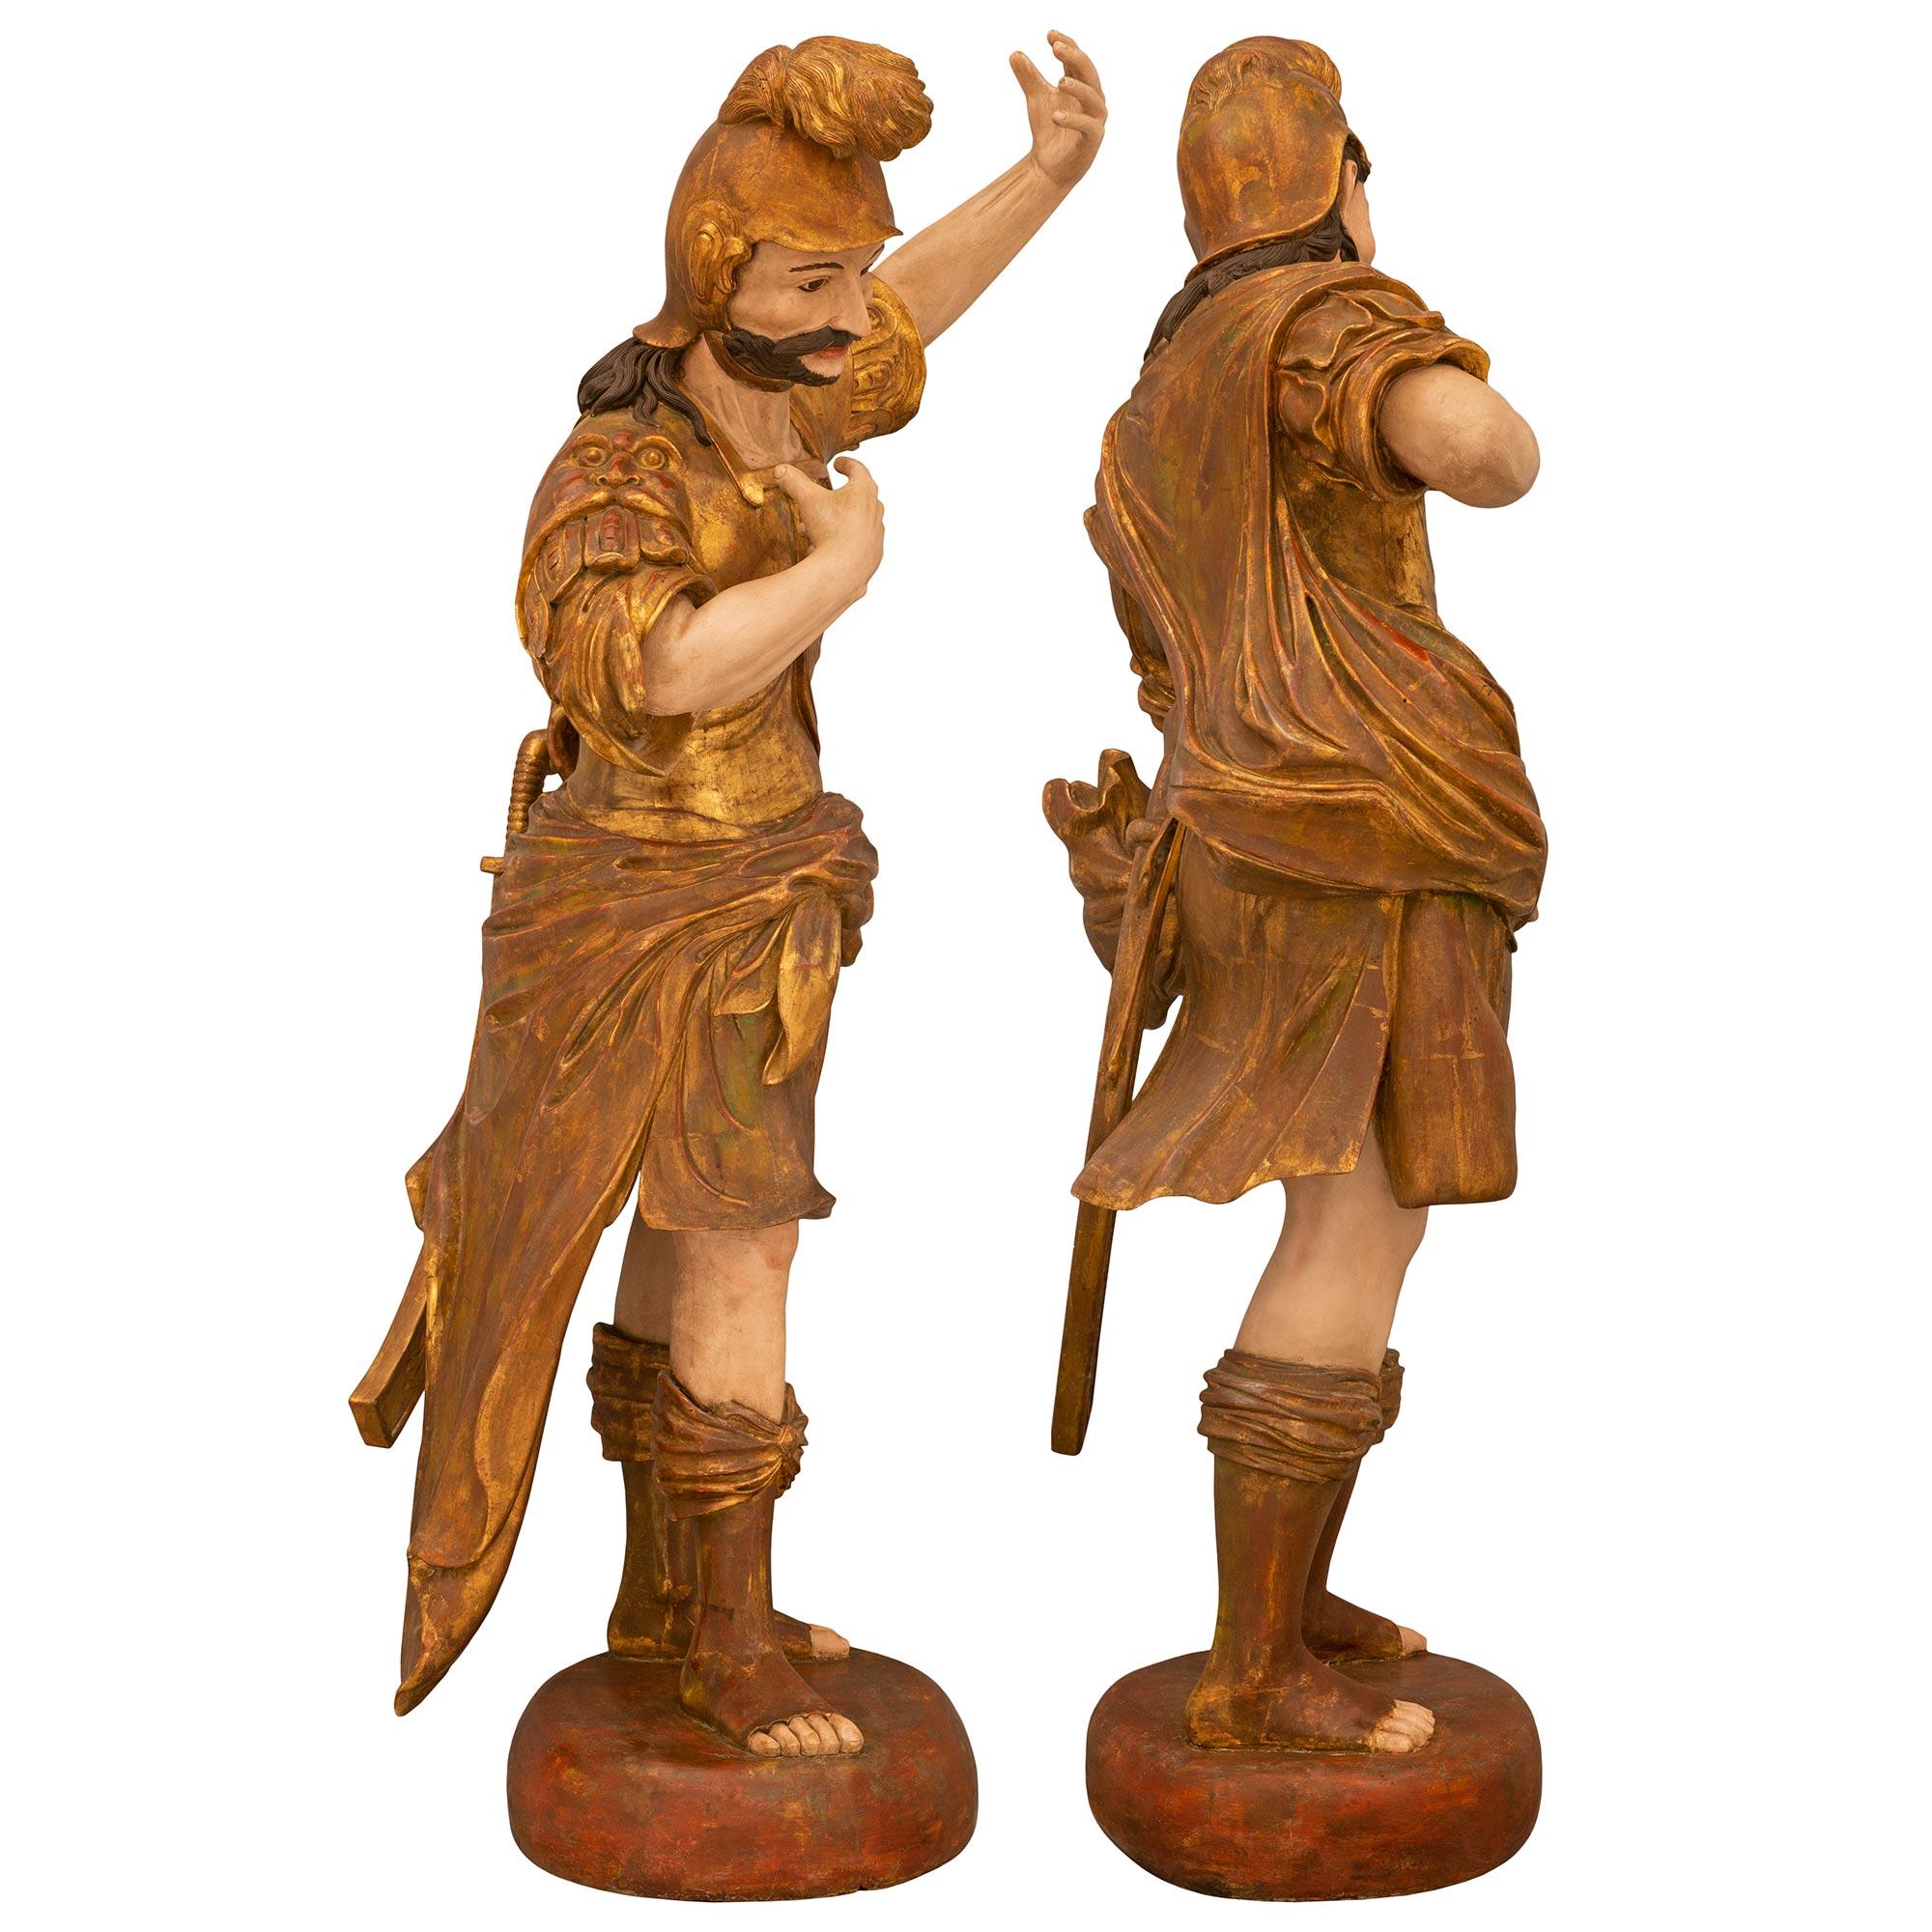 Pair of Italian Early 19th Century Large Scale Roman Theatrical Carved Statues In Good Condition For Sale In West Palm Beach, FL